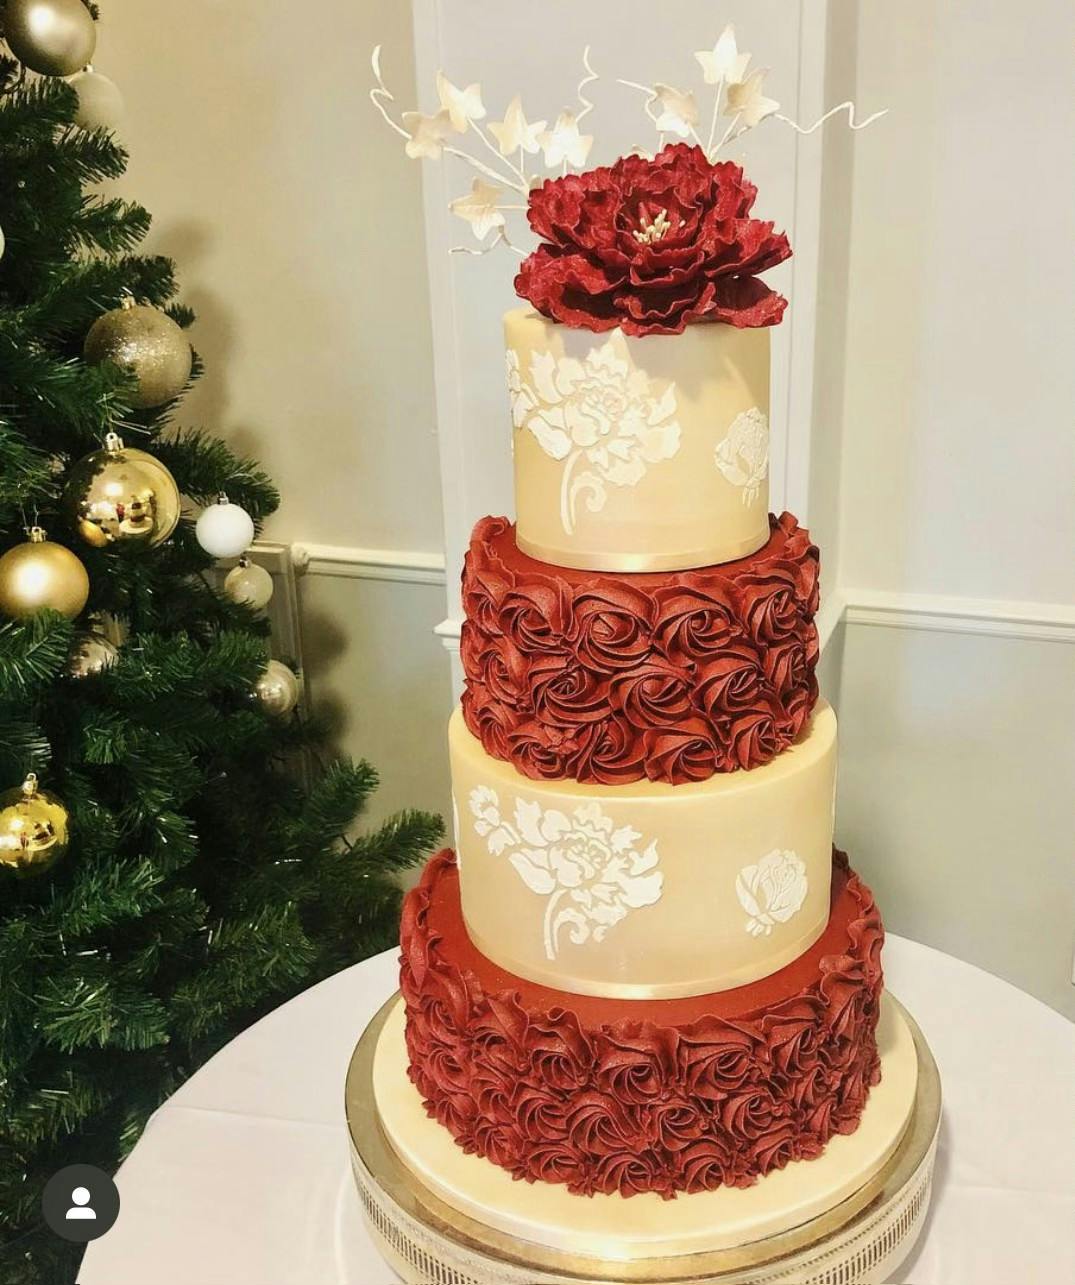 Red and pink wedding cake with swirly red icing flowers on alternating layers and a red rose on top